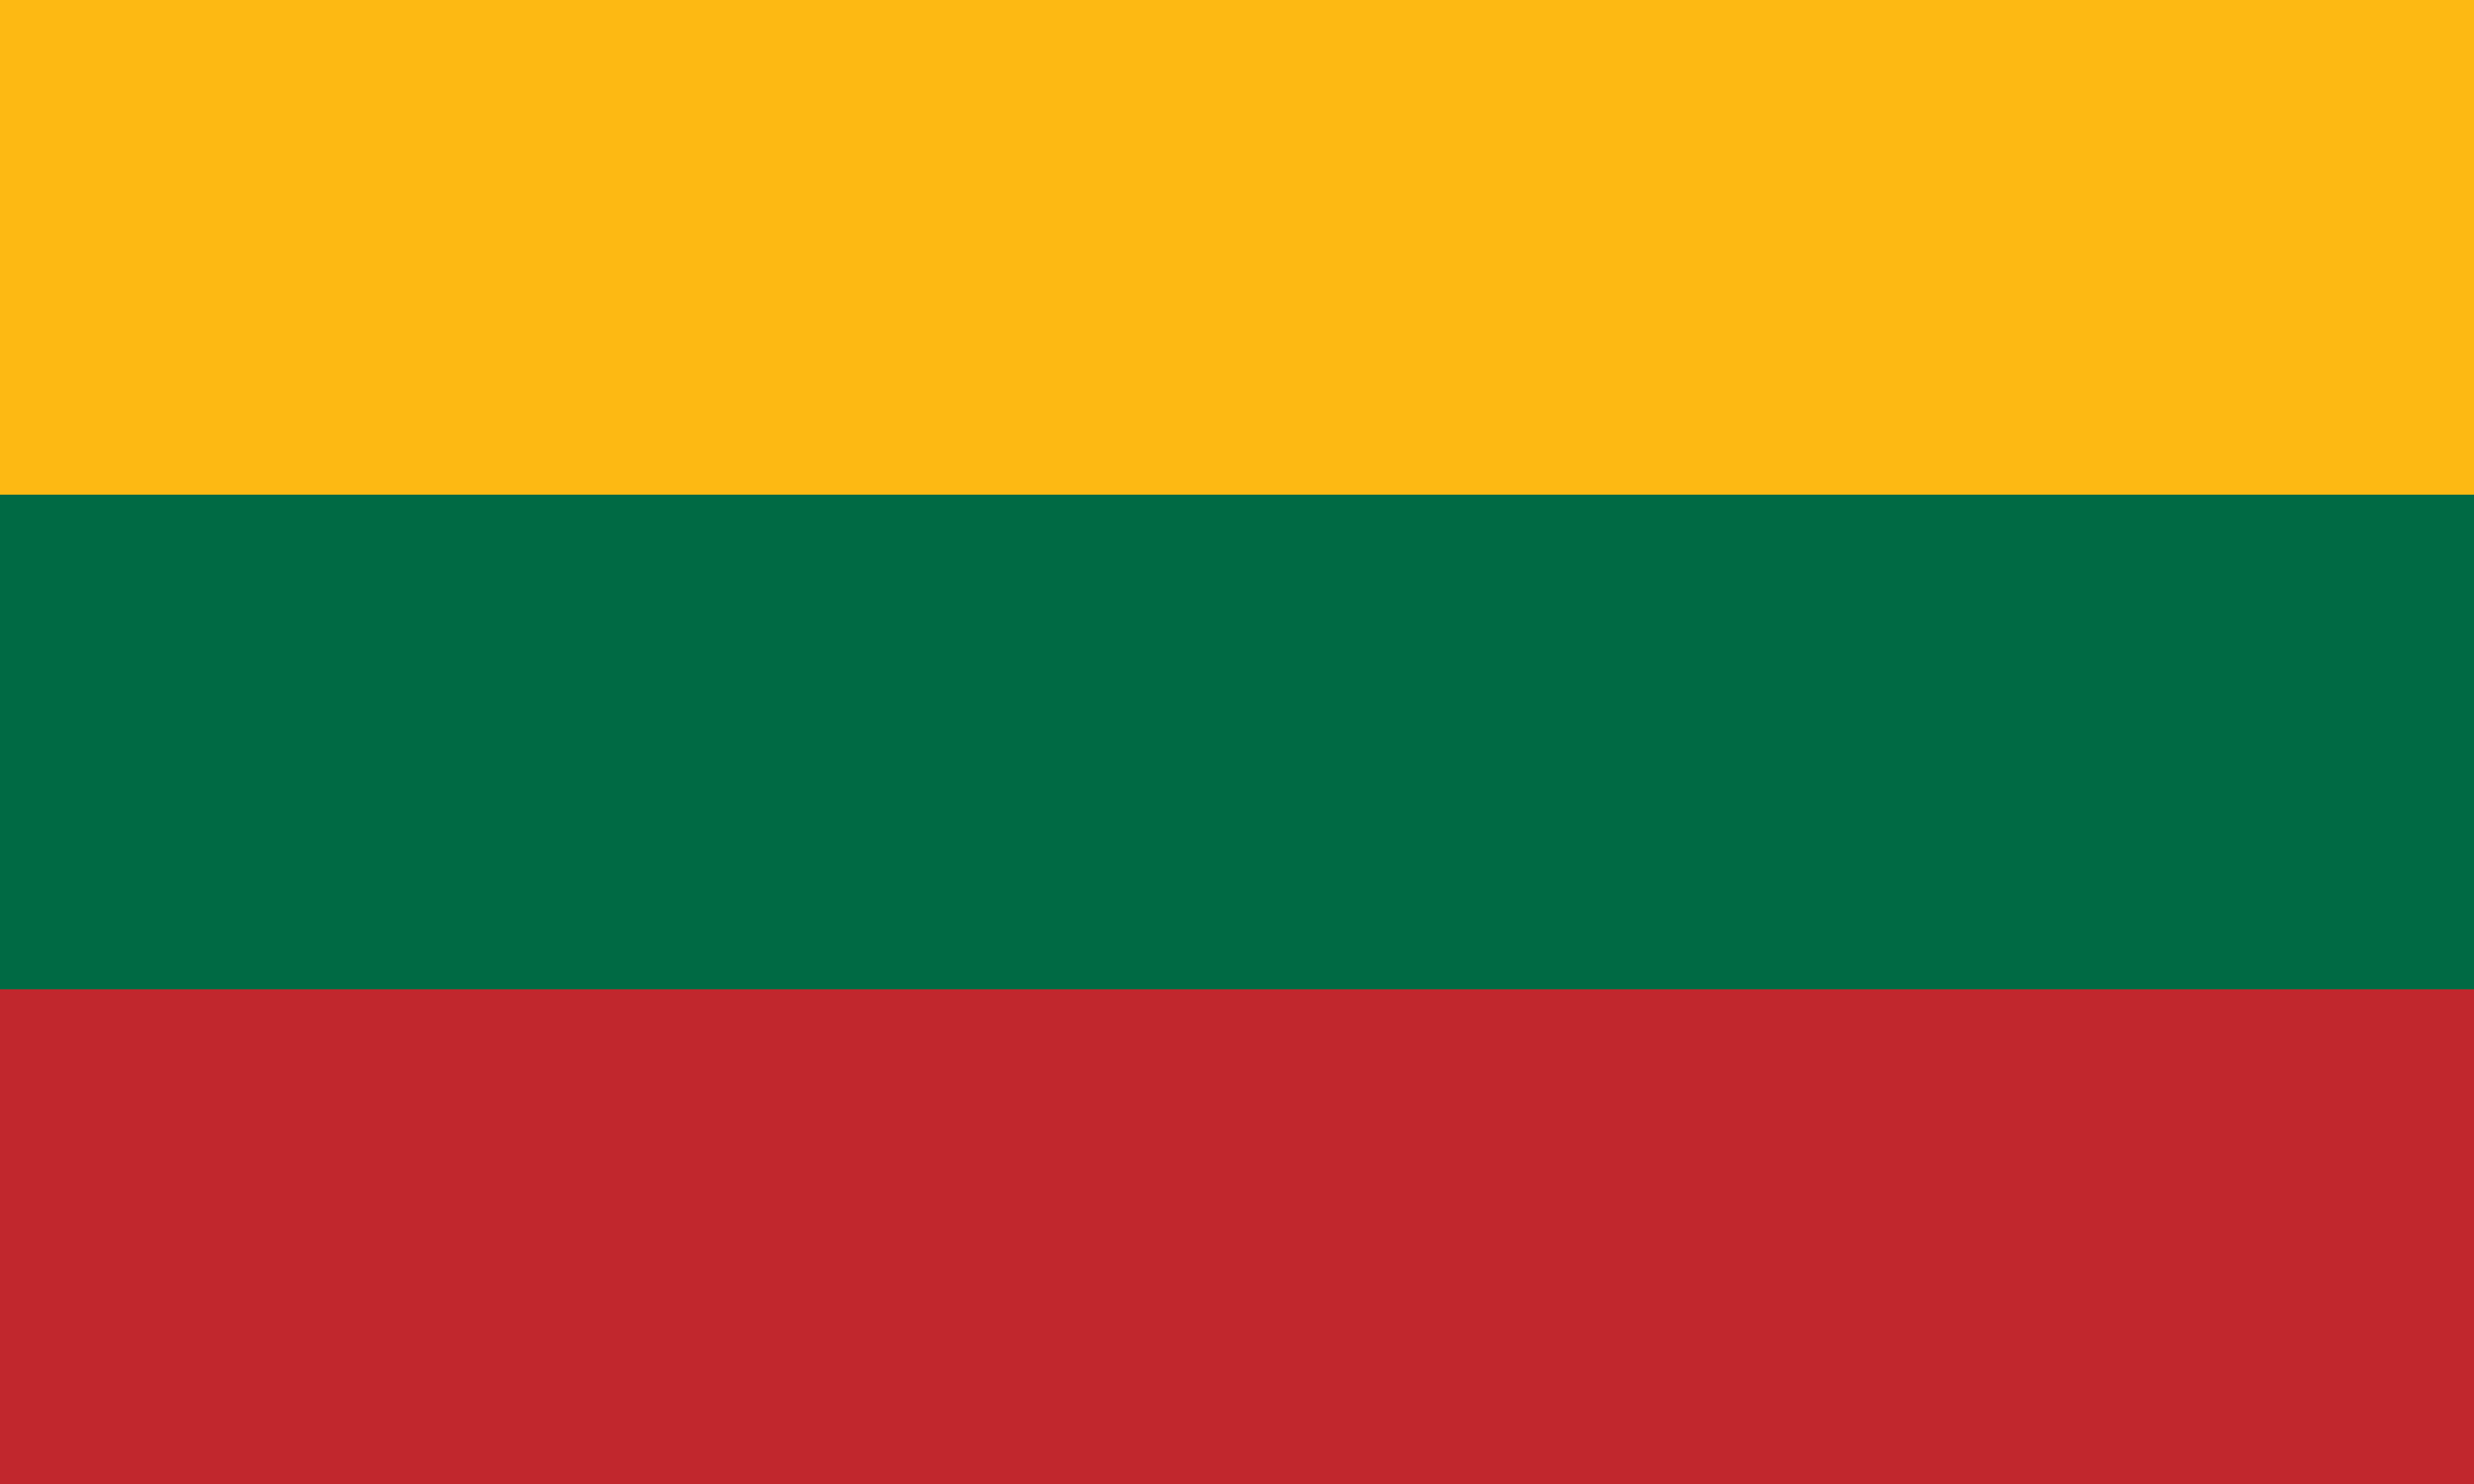 Lithuania Flag - Republic of Lithuania Drone Laws